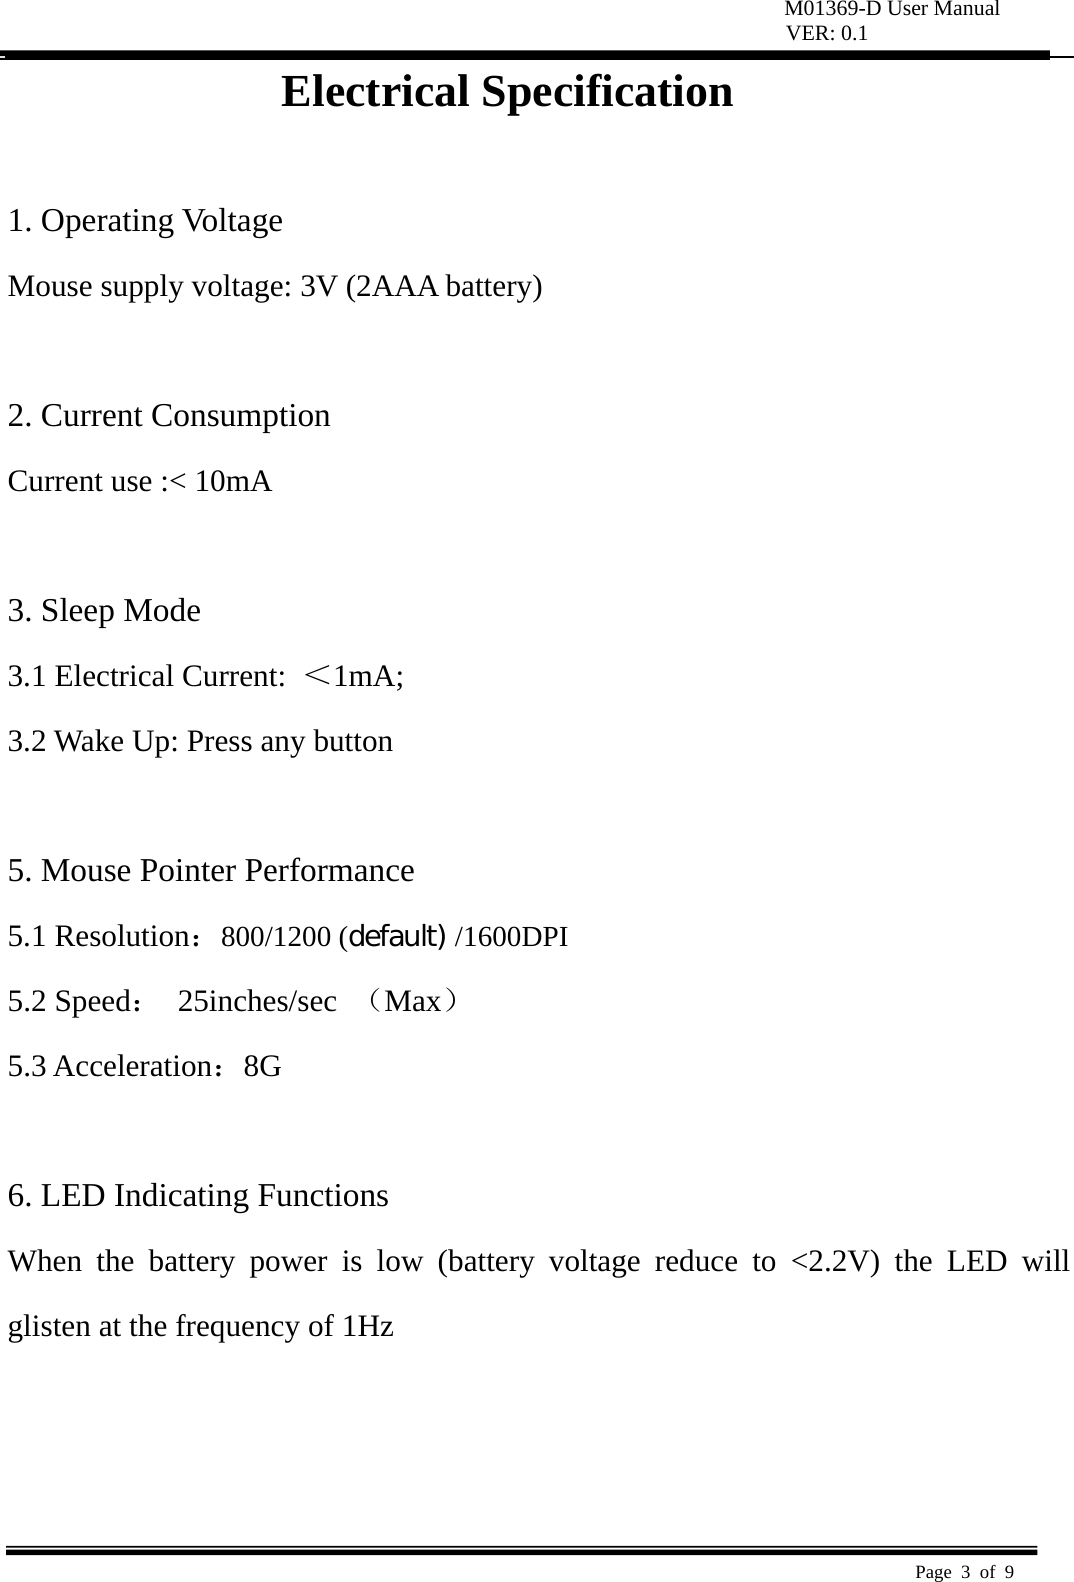 M01369-D User Manual VER: 0.1  Page 3 of 9   Electrical Specification  1. Operating Voltage   Mouse supply voltage: 3V (2AAA battery)    2. Current Consumption   Current use :&lt; 10mA    3. Sleep Mode   3.1 Electrical Current:  ＜1mA;  3.2 Wake Up: Press any button    5. Mouse Pointer Performance 5.1 Resolution：800/1200 (default) /1600DPI 5.2 Speed： 25inches/sec （Max） 5.3 Acceleration：8G   6. LED Indicating Functions   When the battery power is low (battery voltage reduce to &lt;2.2V) the LED will glisten at the frequency of 1Hz      